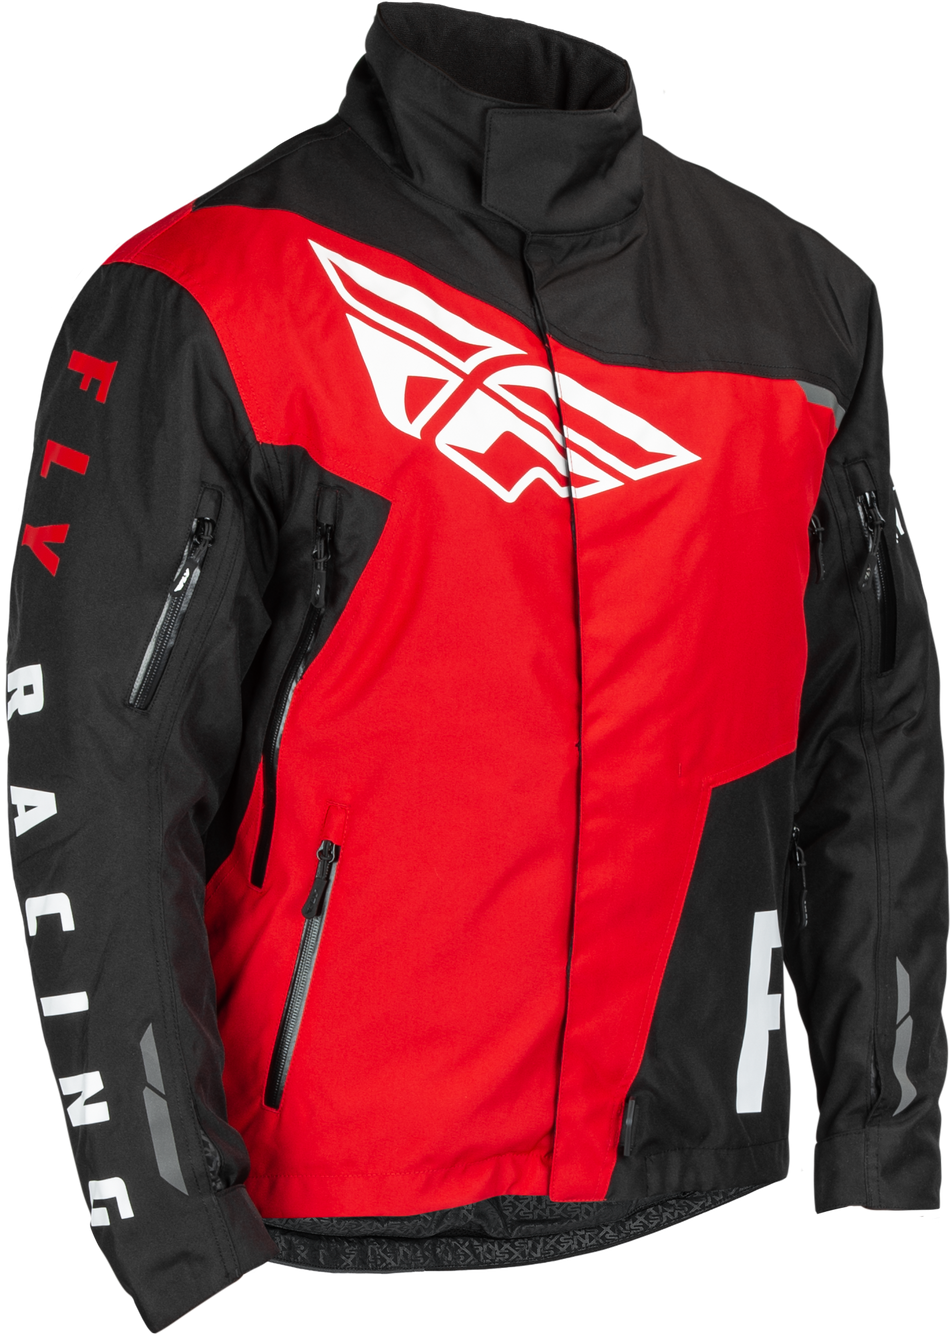 FLY RACING Snx Pro Jacket Black/Red Md 470-5402M